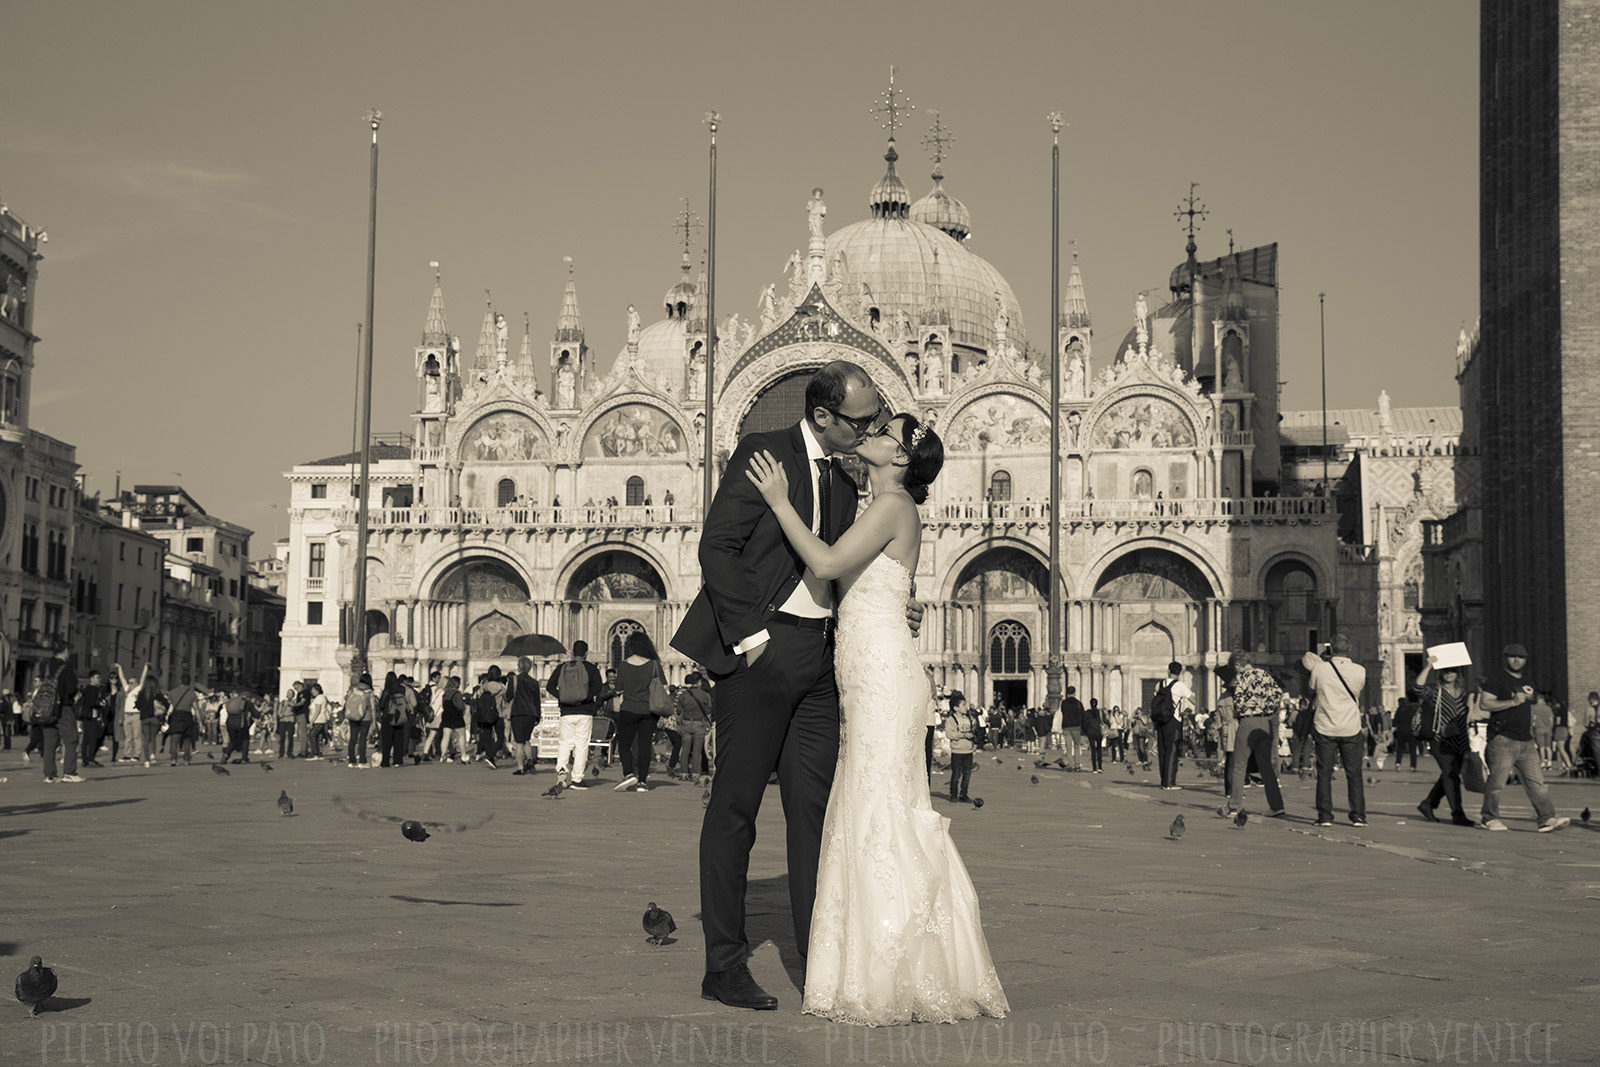 Photographer in Venice Italy for honeymoon photography session ~ Romantic pictures for couple vacation in Venice